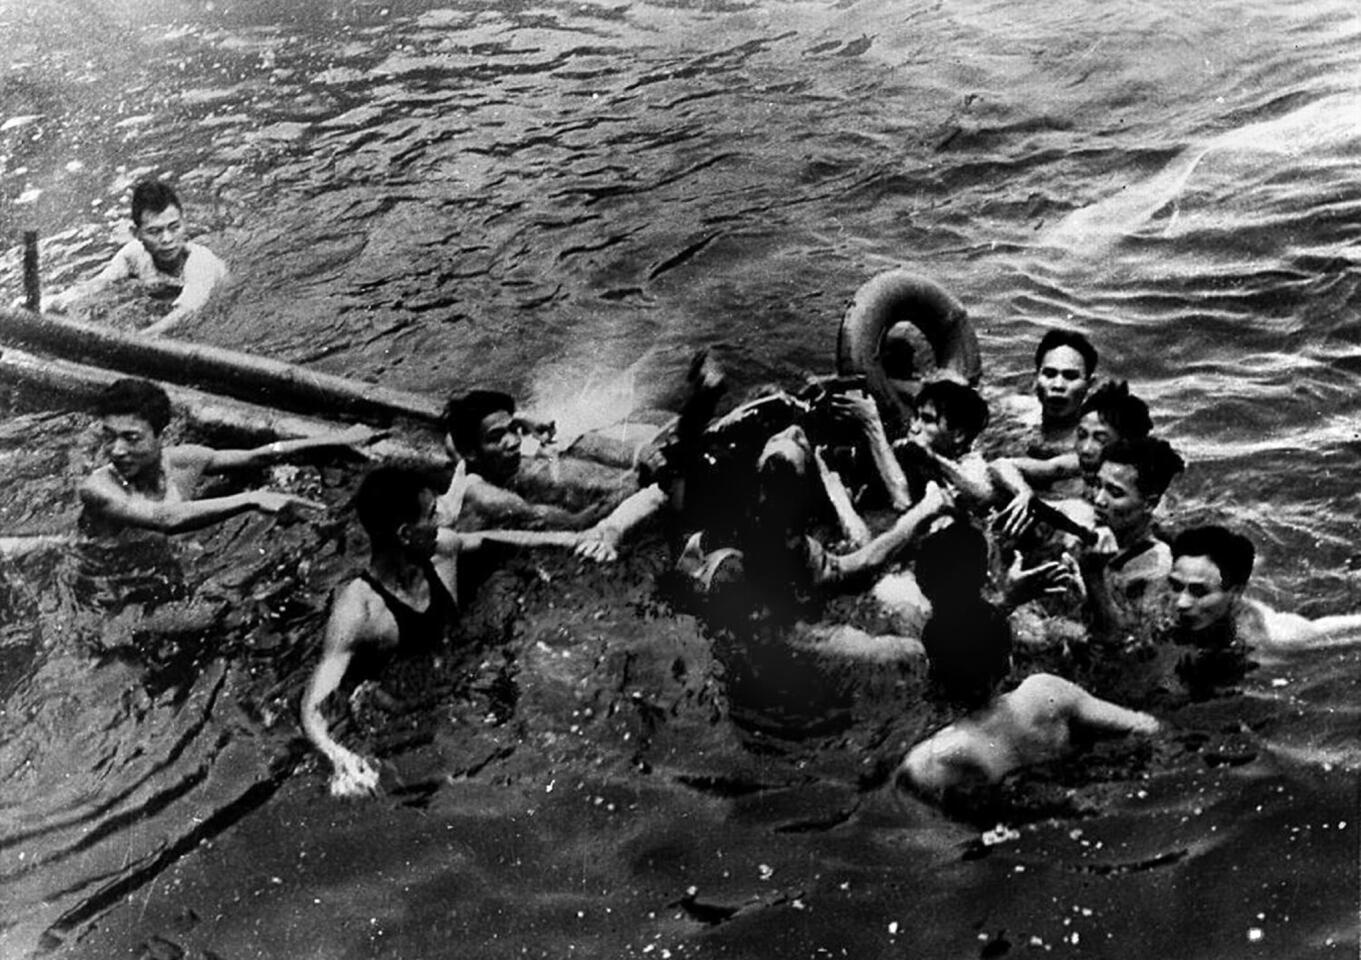 A photo taken October 26, 1967 shows U.S. Navy Airforce Major John McCain, center, being rescued from Hanoi's Truc Bach lake by several Hanoi residents after his Navy warplane was downed by the Northern Vietnamese army.